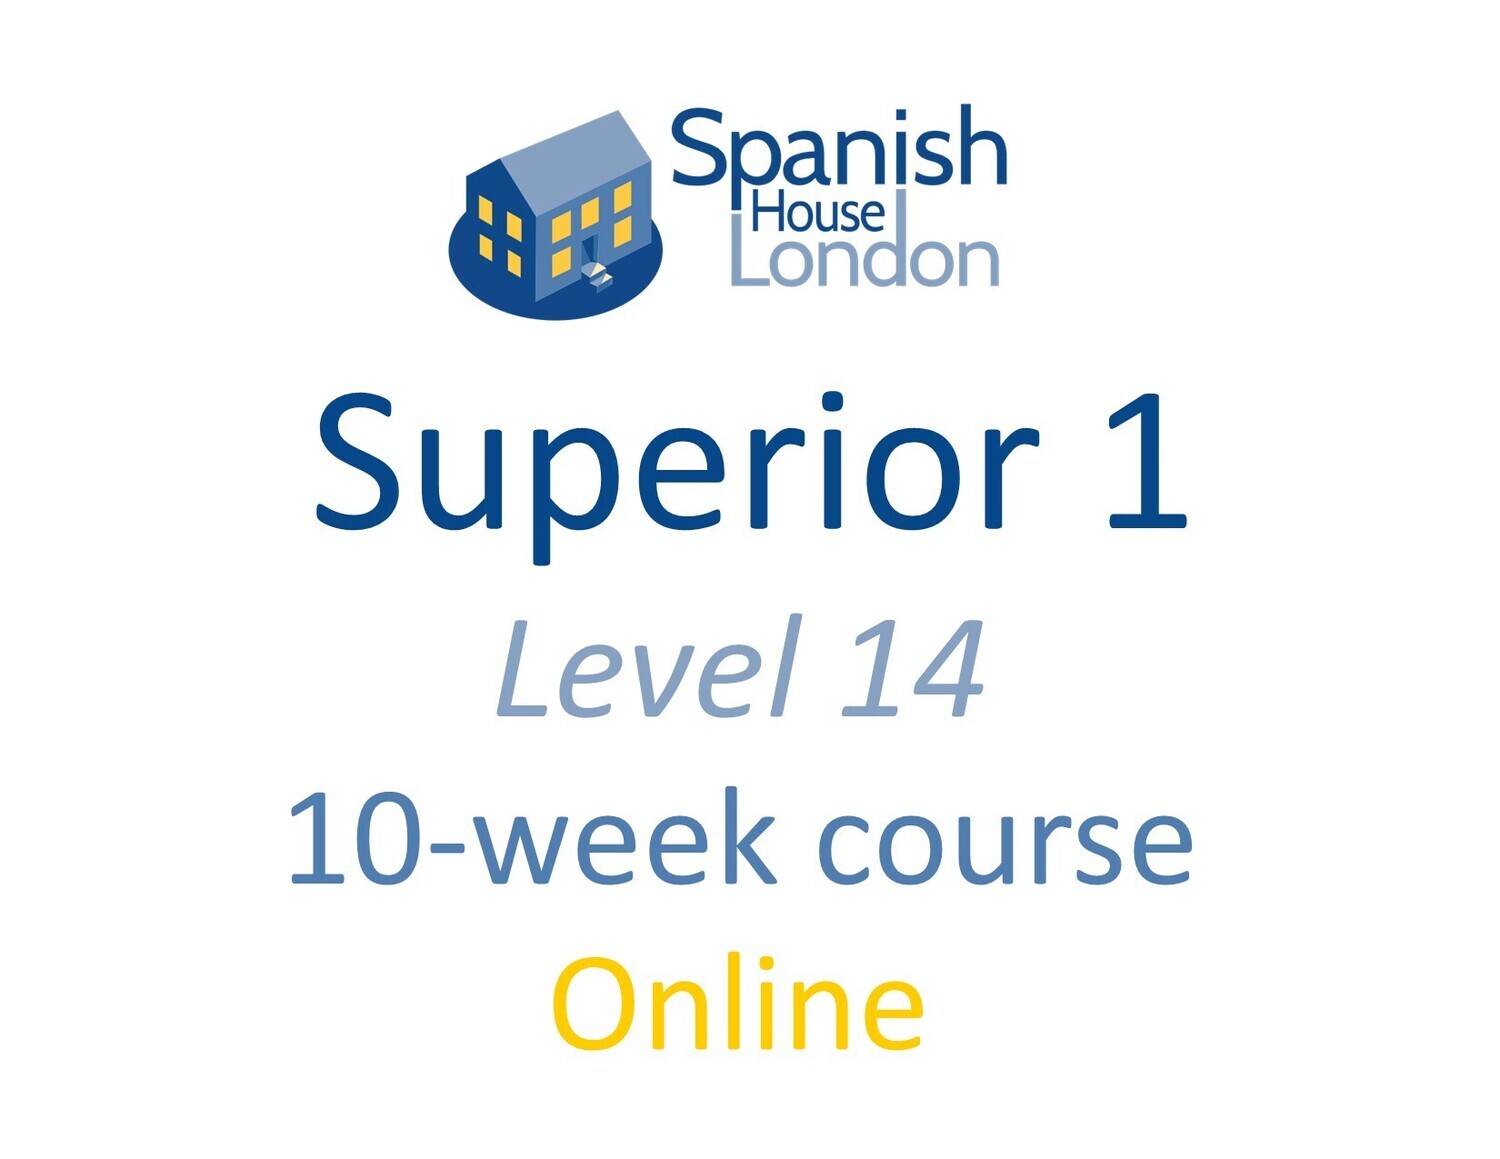 Superior 1 Course starting on 2nd August at 7.30pm Online